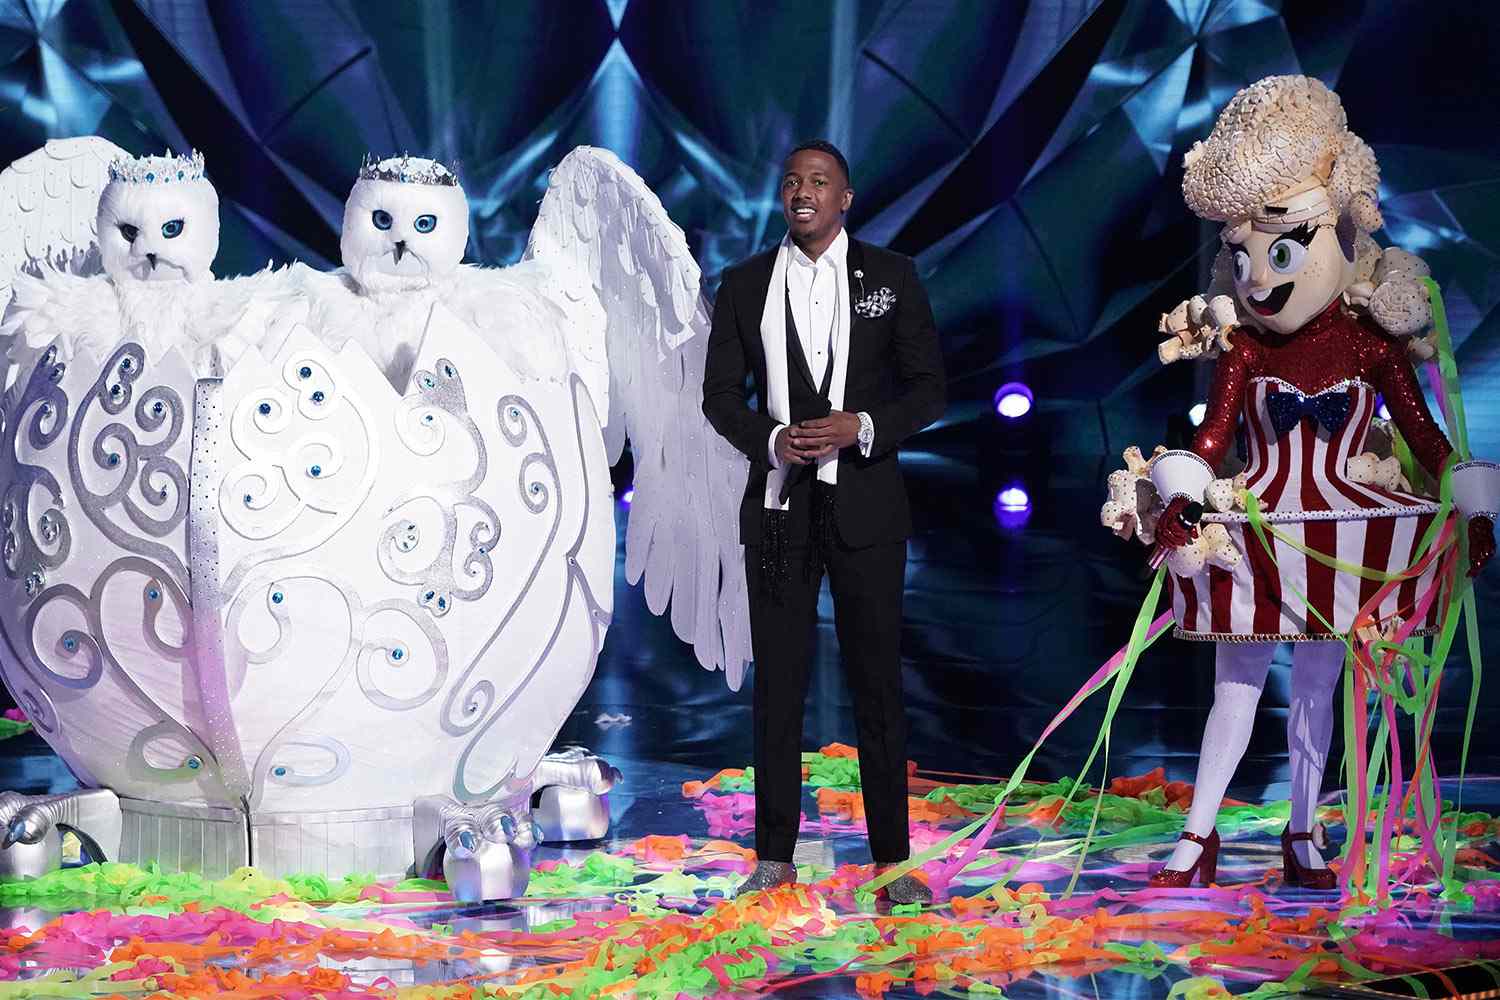 Snow Owls and Popcorn on stage with host Nick Cannon.